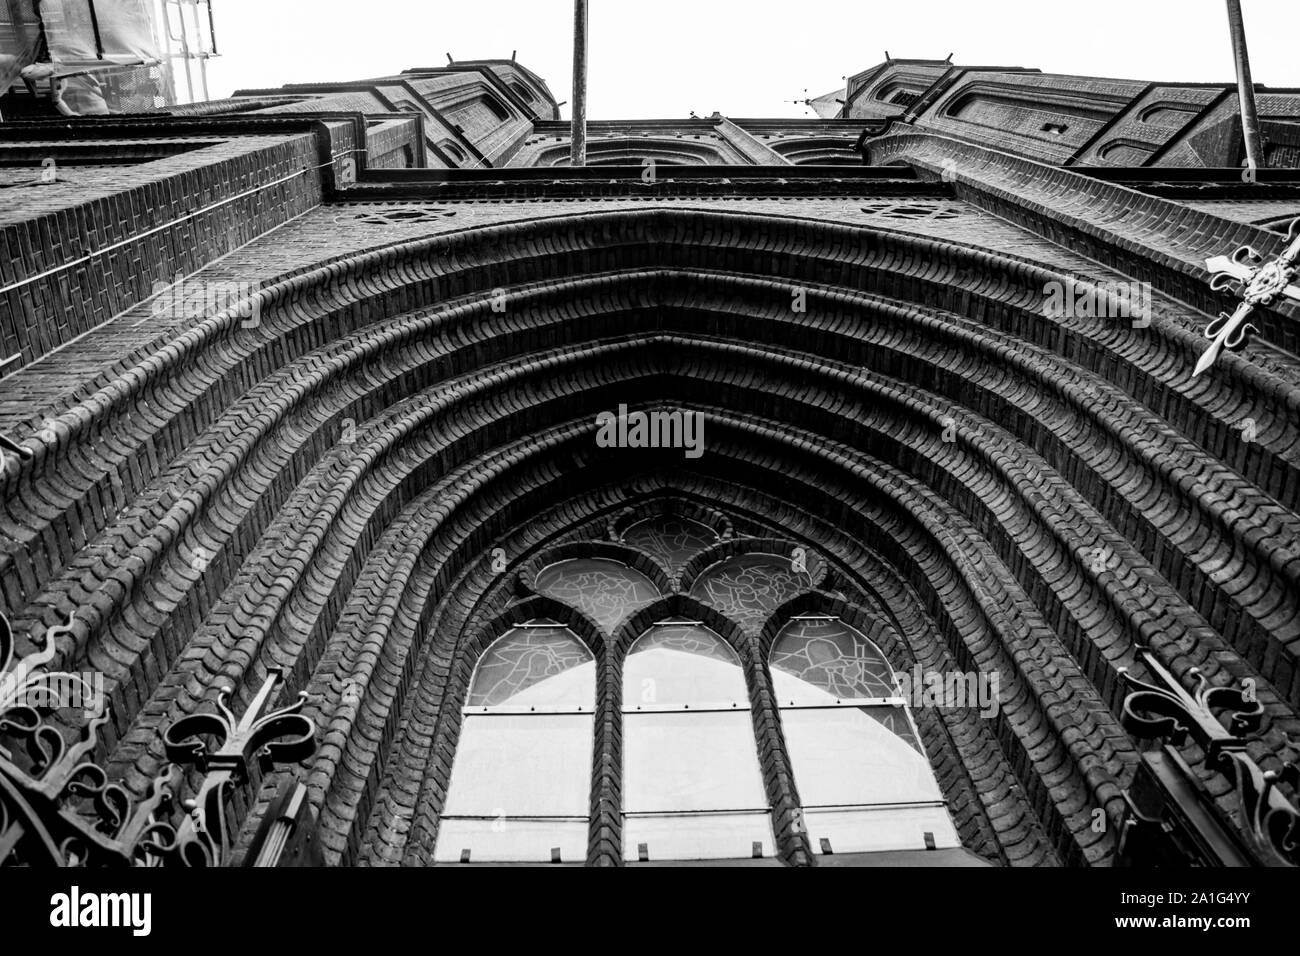 Big window on a gothic structure Stock Photo